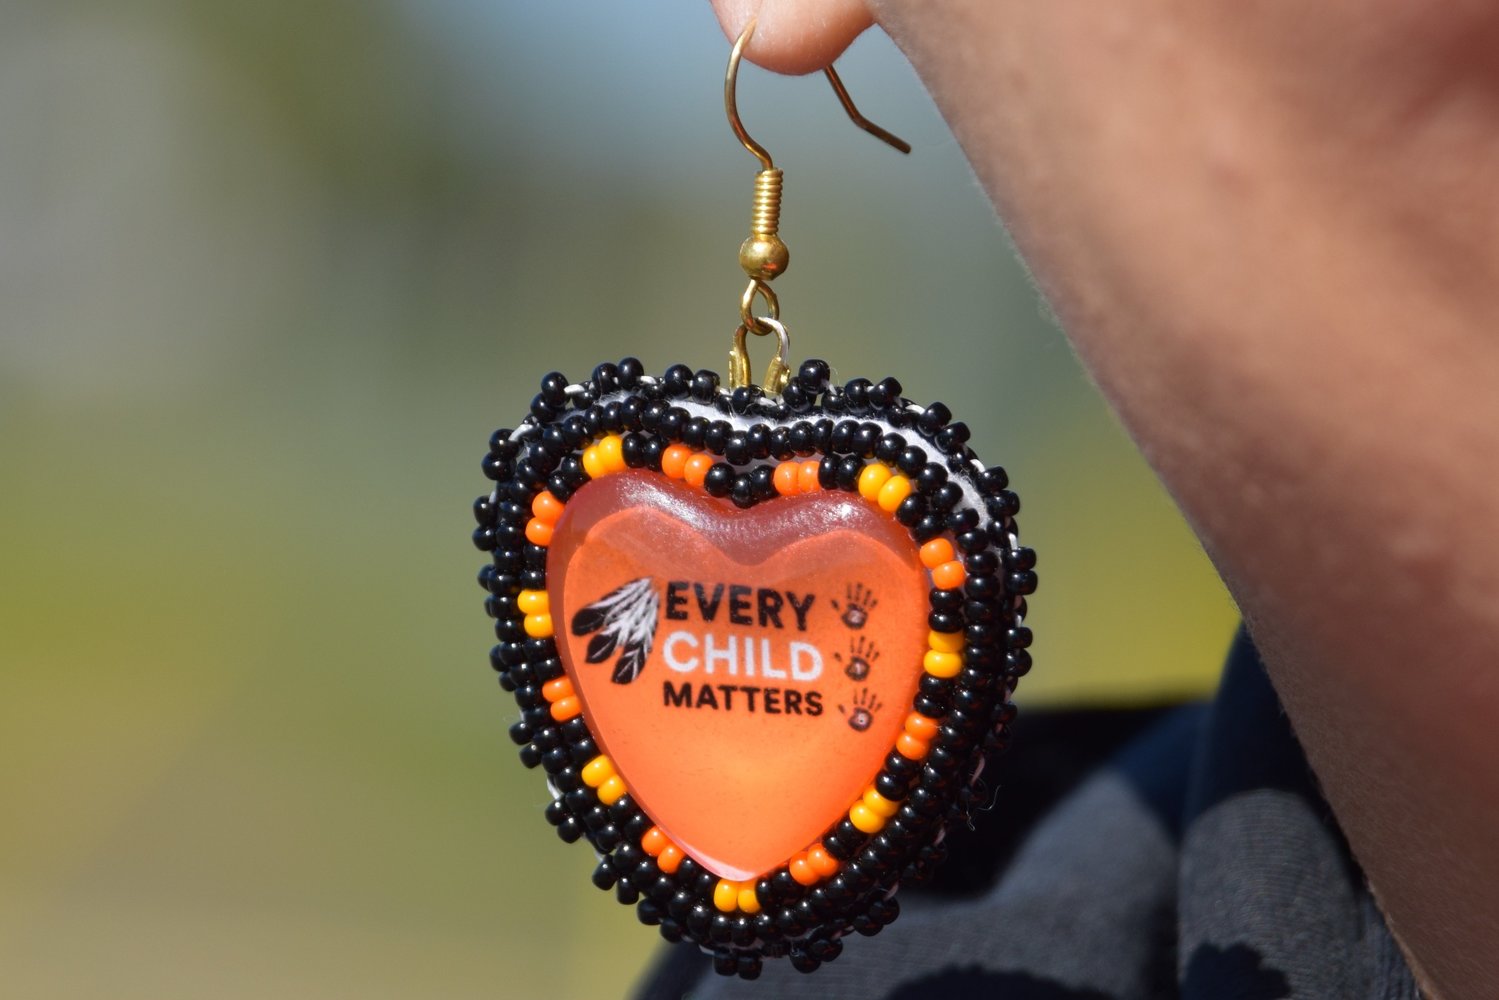 Heather George wears a pair of earrings with the slogan “Every Child Matters” while marching with Mohawk Institute survivors and their families for access to Anglican Church records.